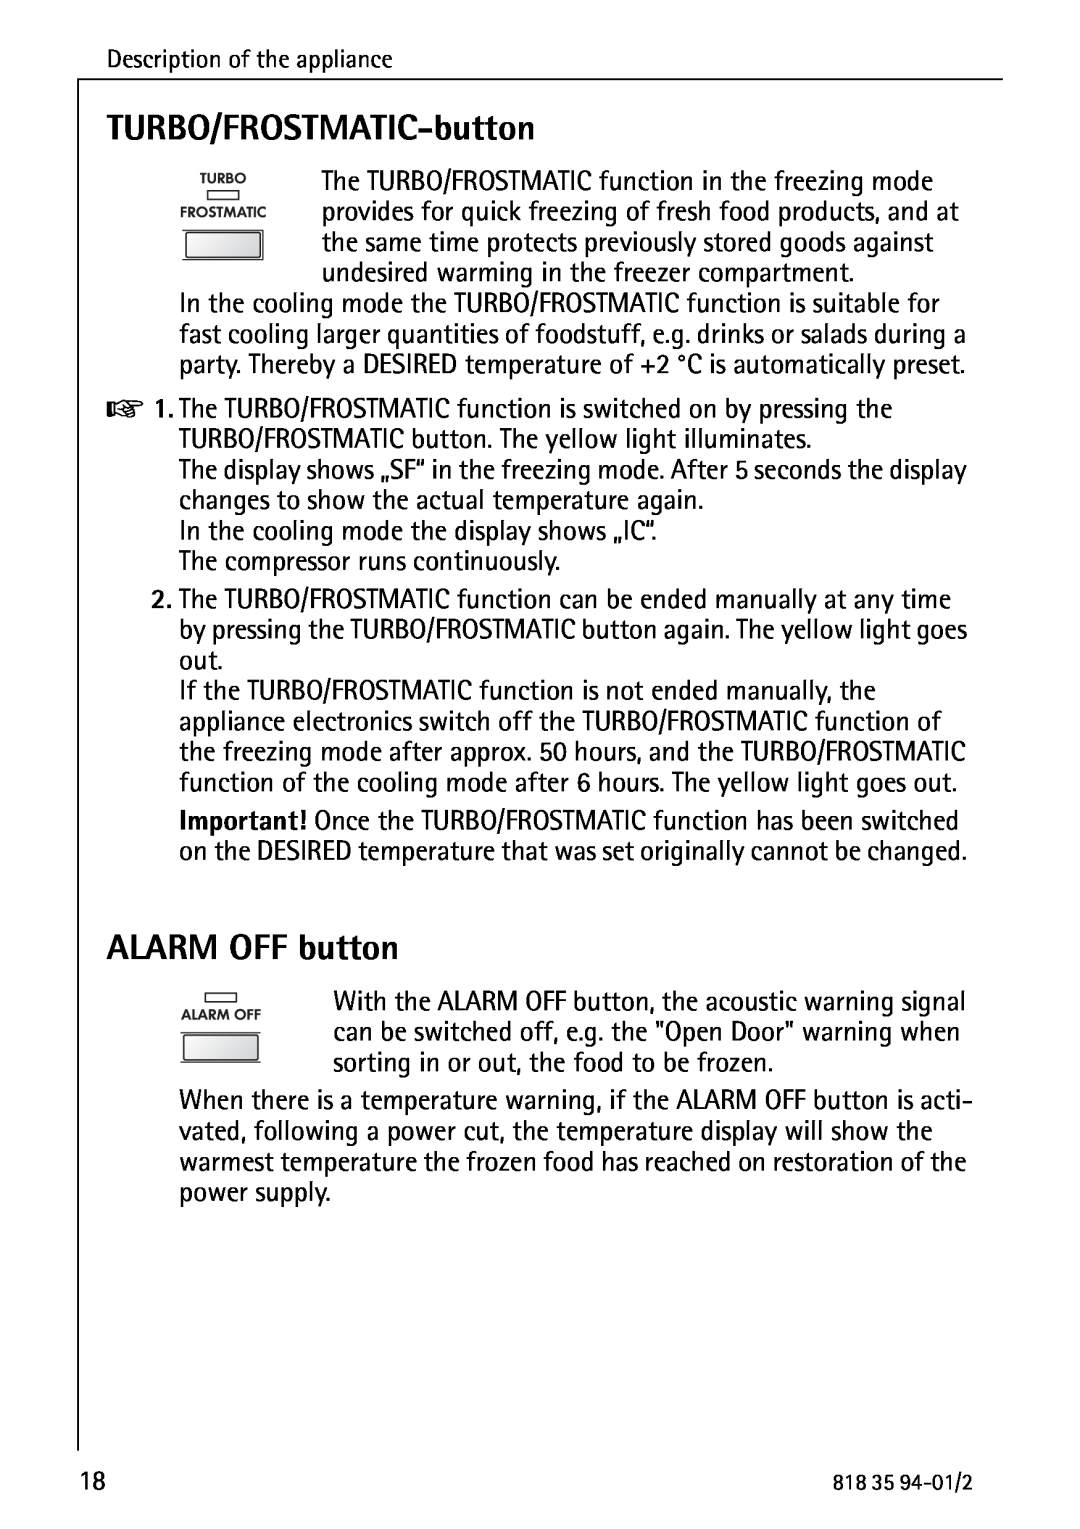 Electrolux U31462 operating instructions TURBO/FROSTMATIC-button, ALARM OFF button 